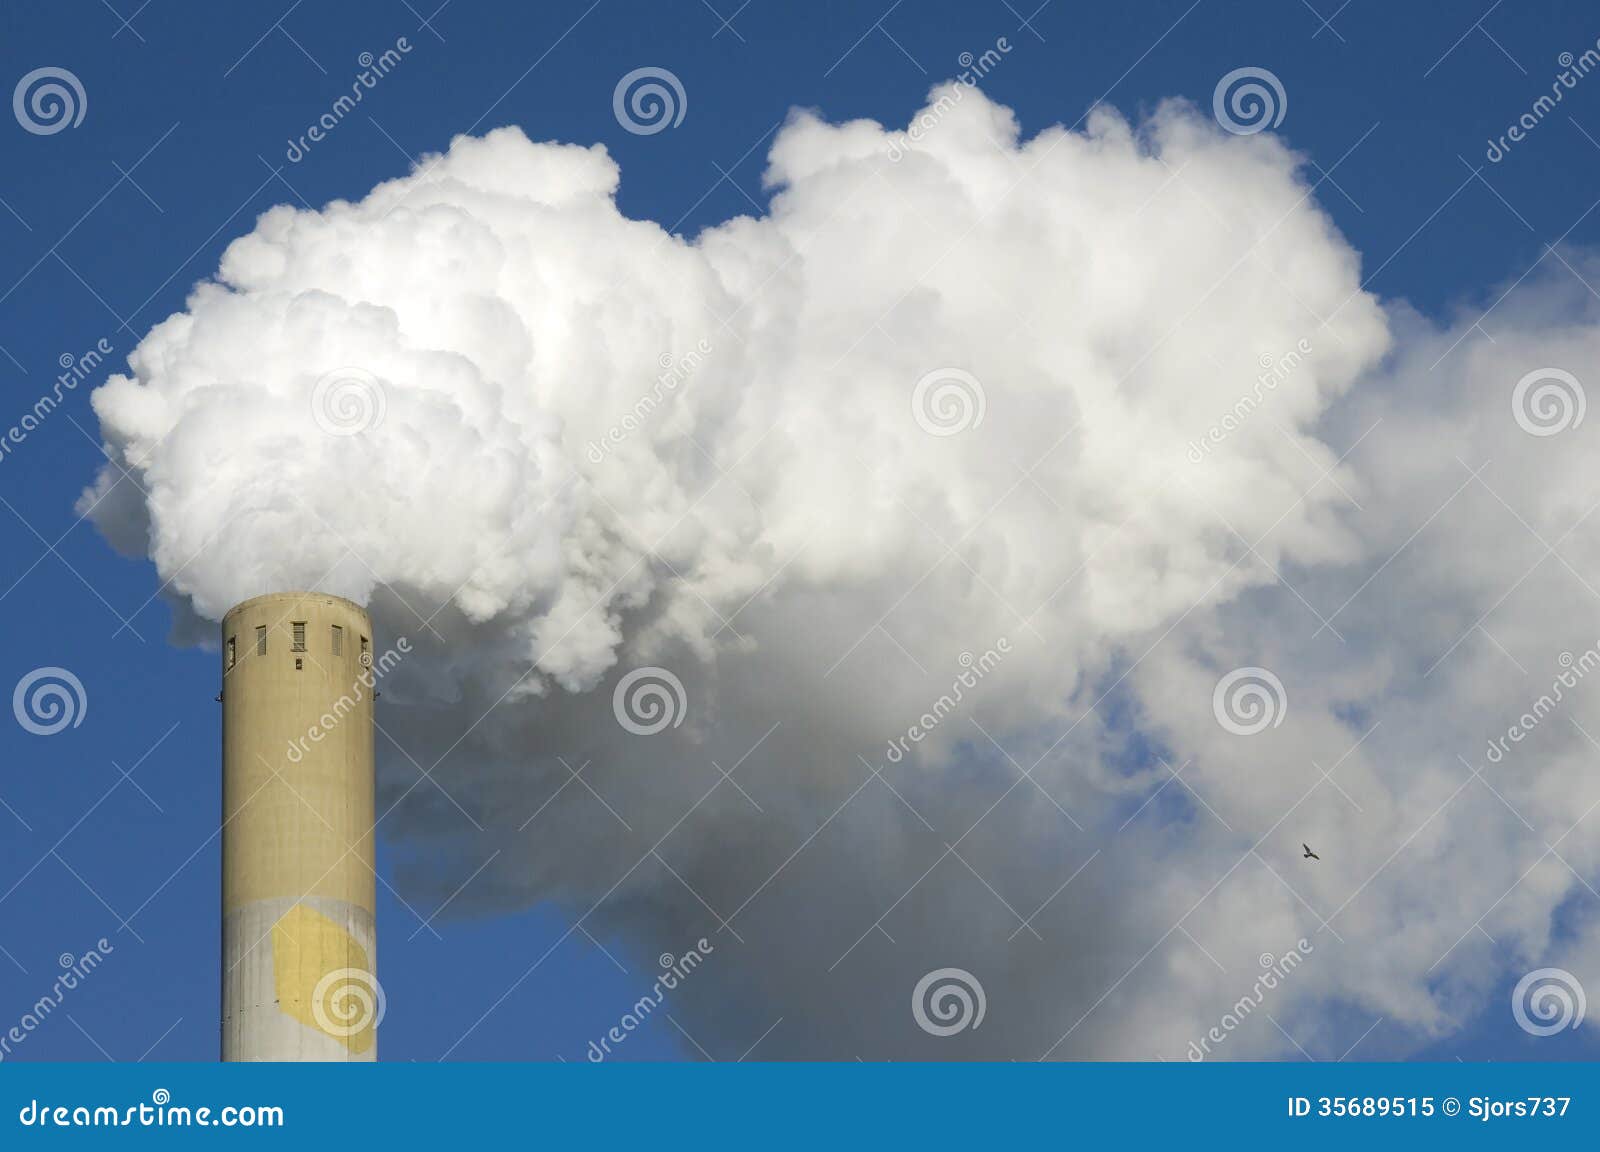 co2 emissions from flue pipe of coal power plant